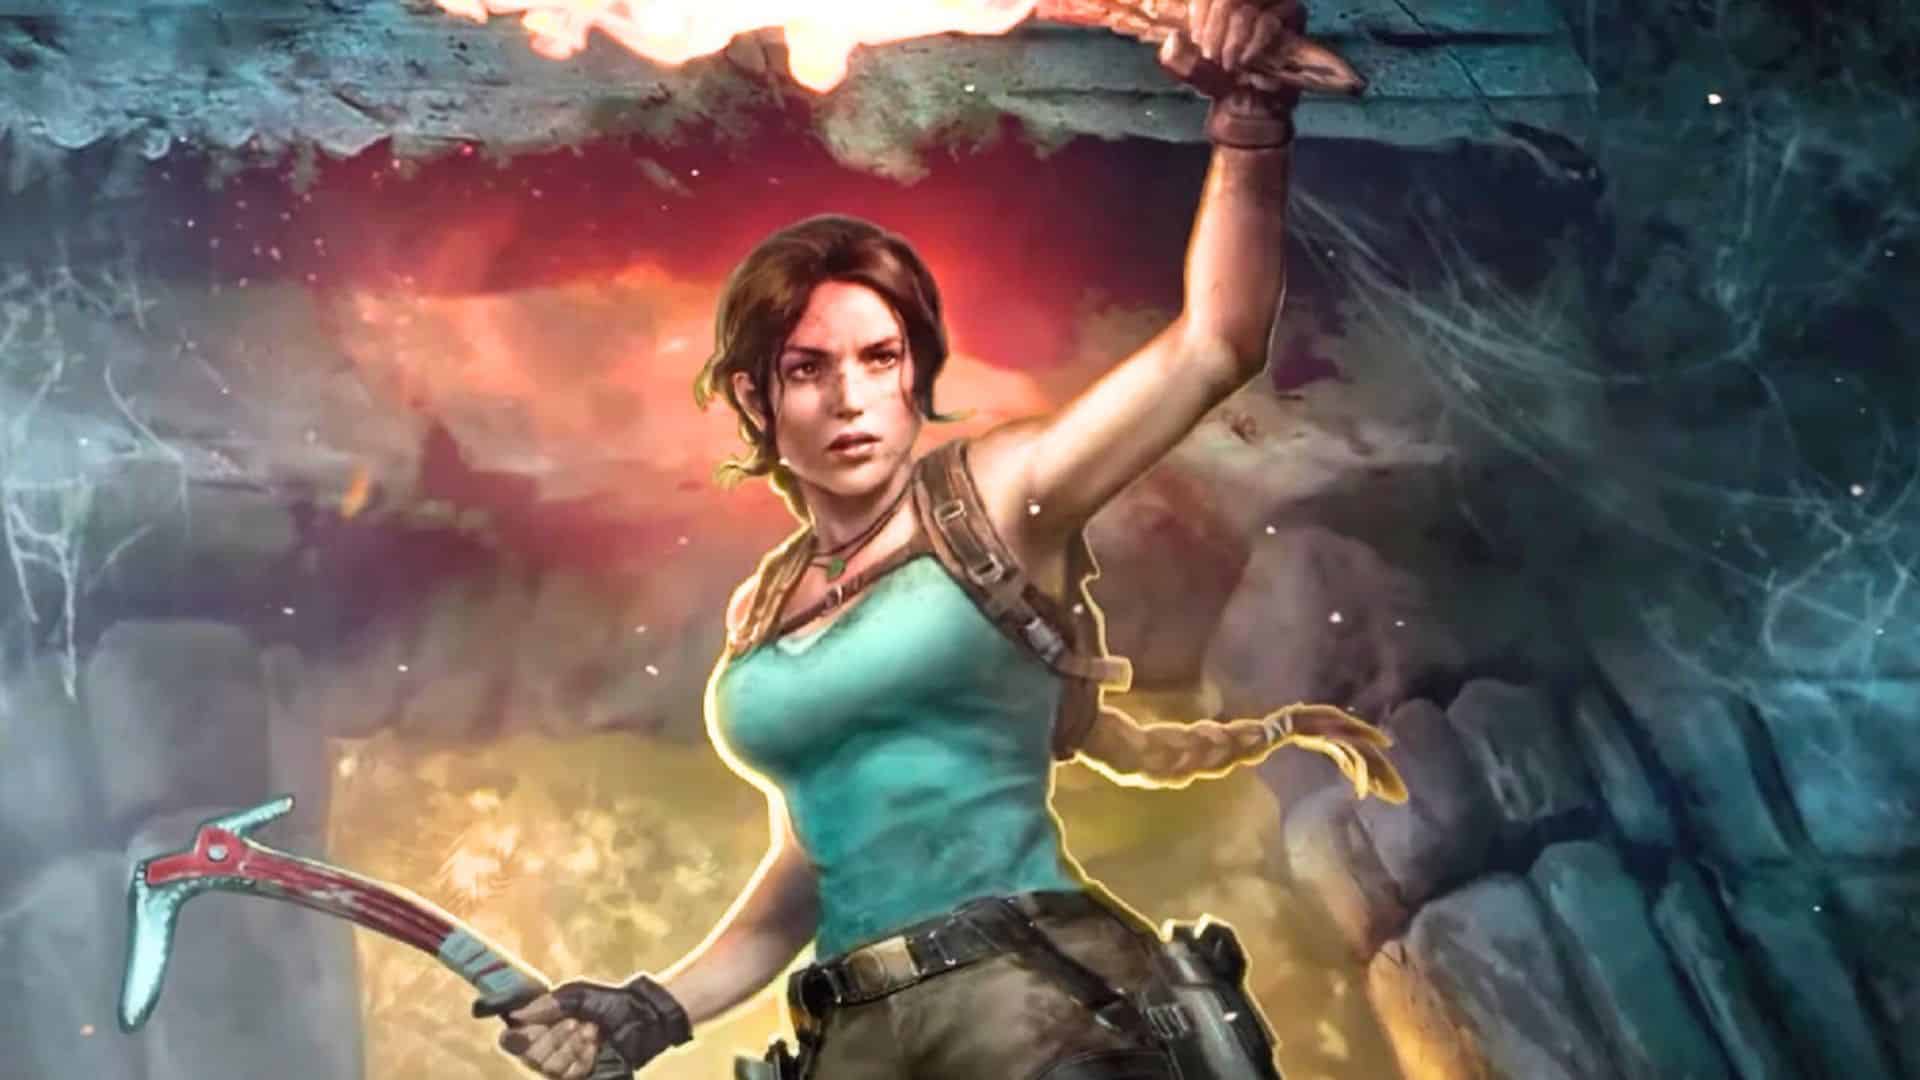 Tomb Raider Magic The Gathering cards release date, price & how to buy